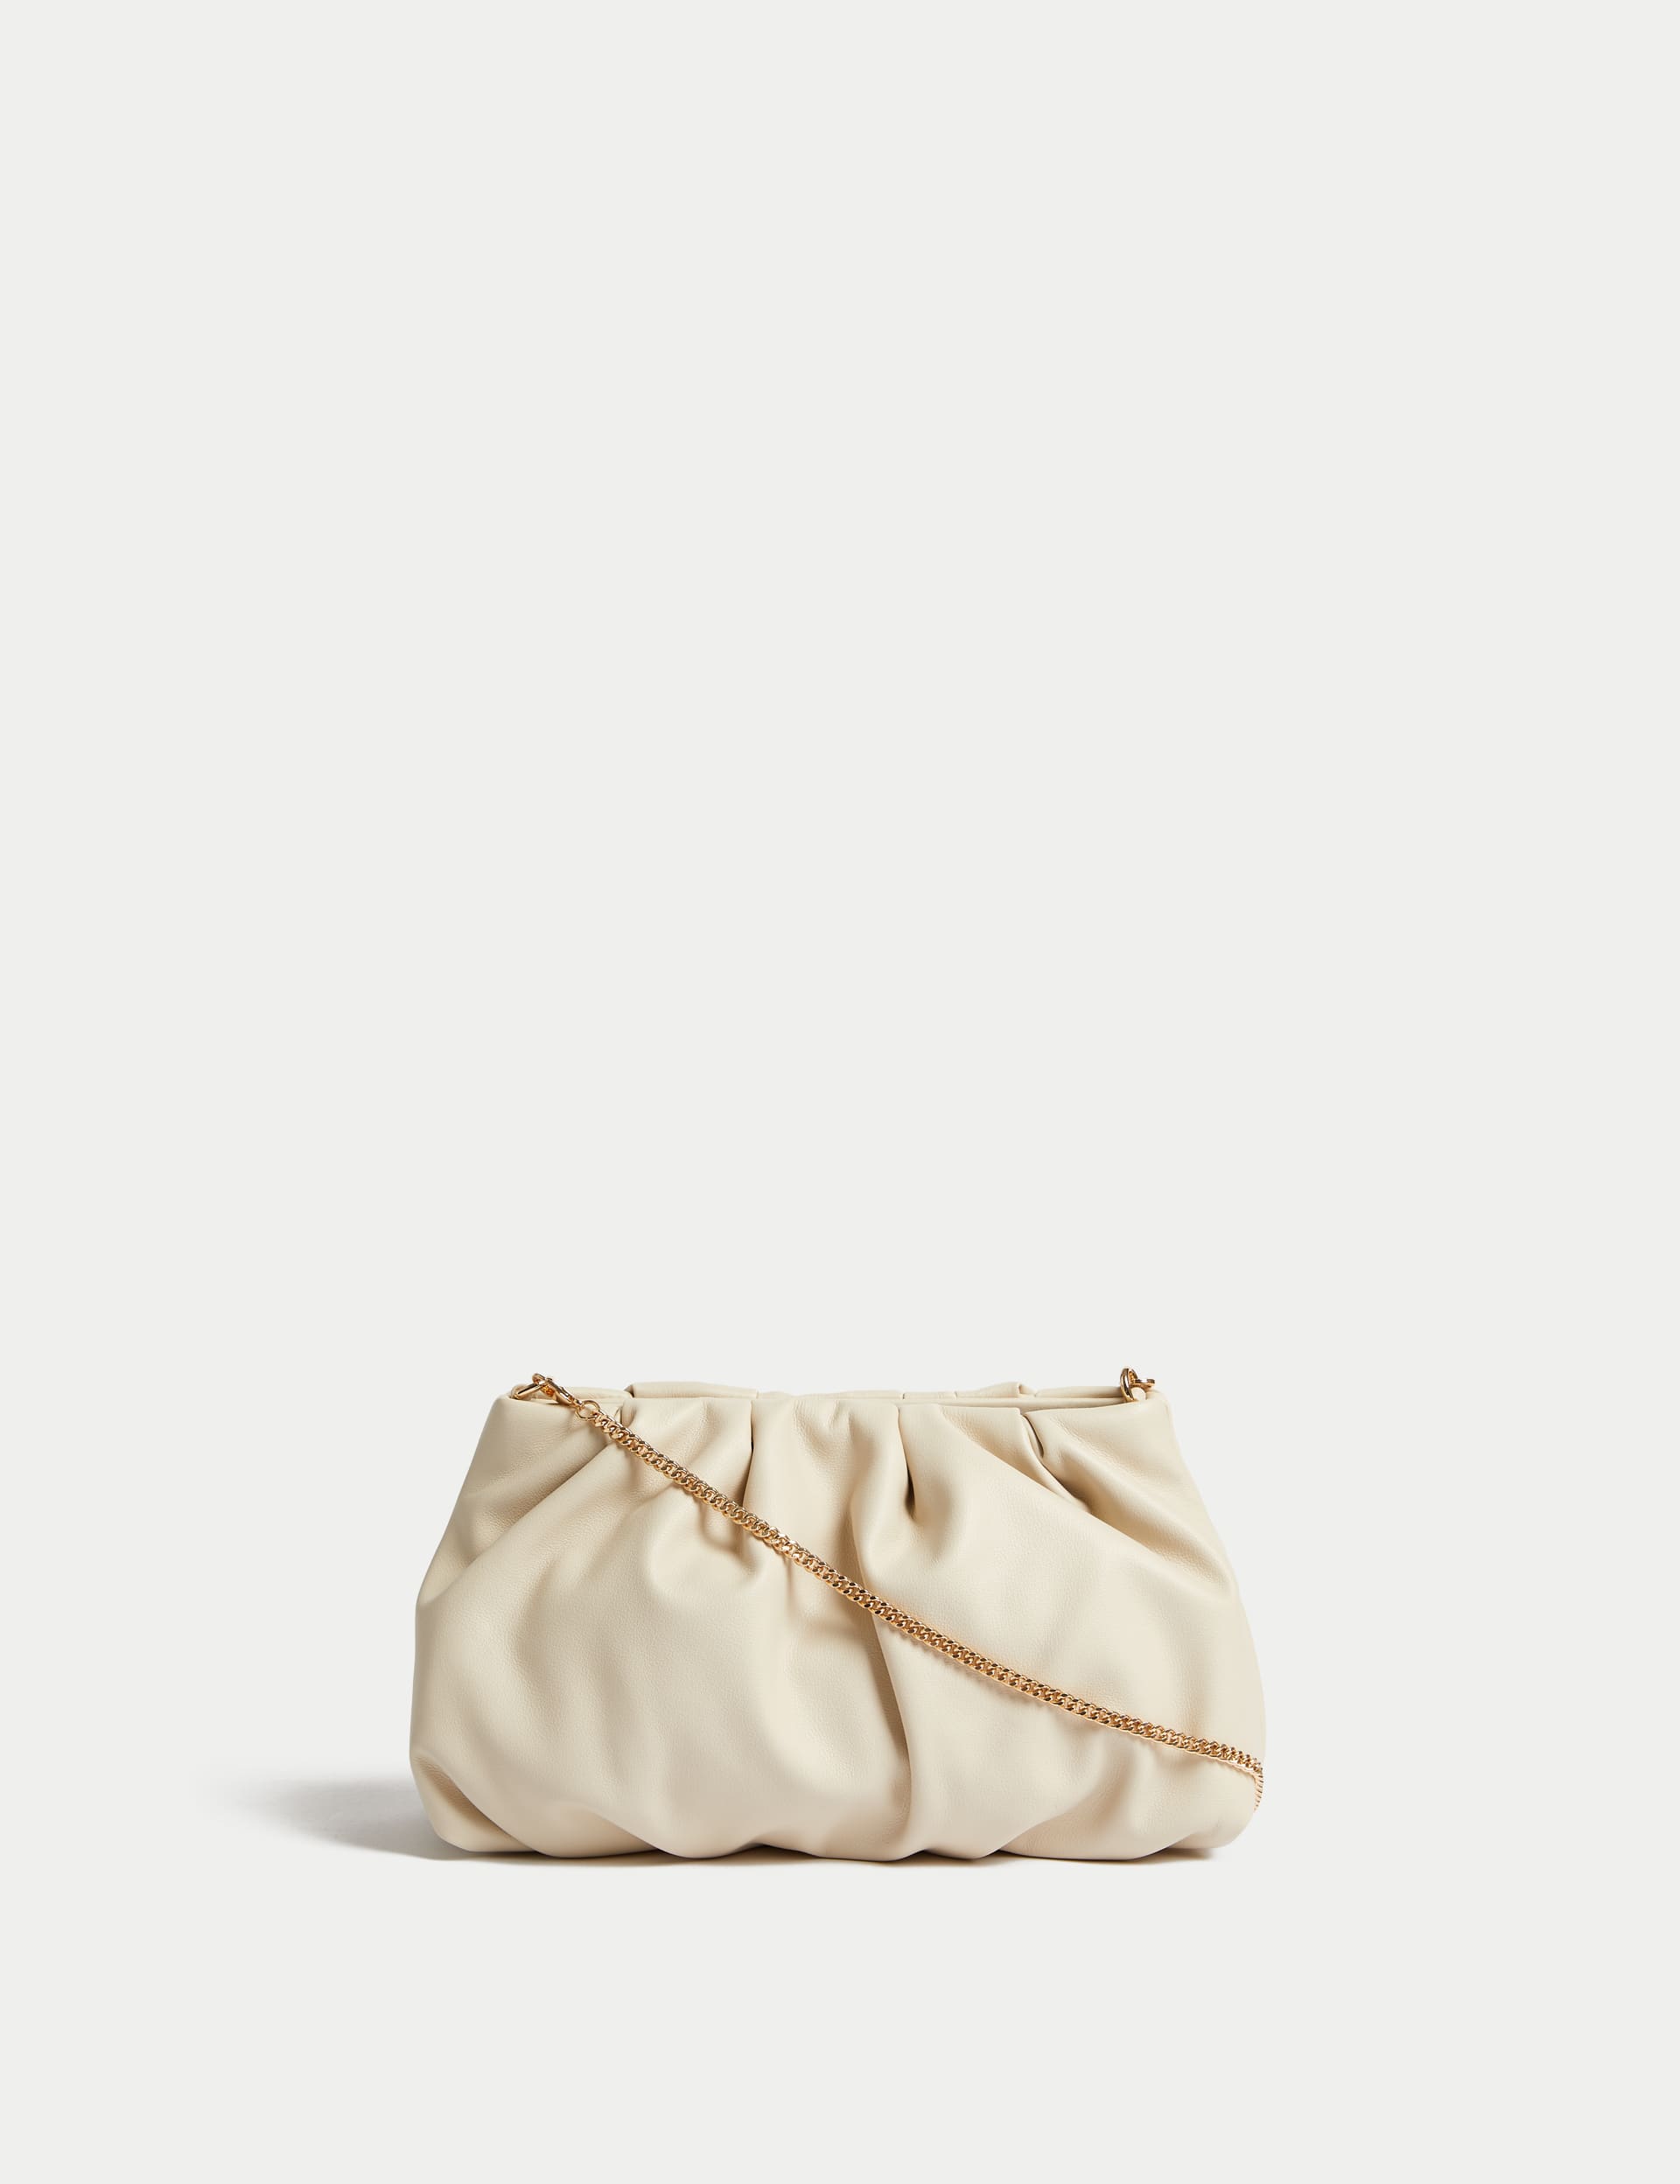 Faux Leather Ruched Clutch Bag